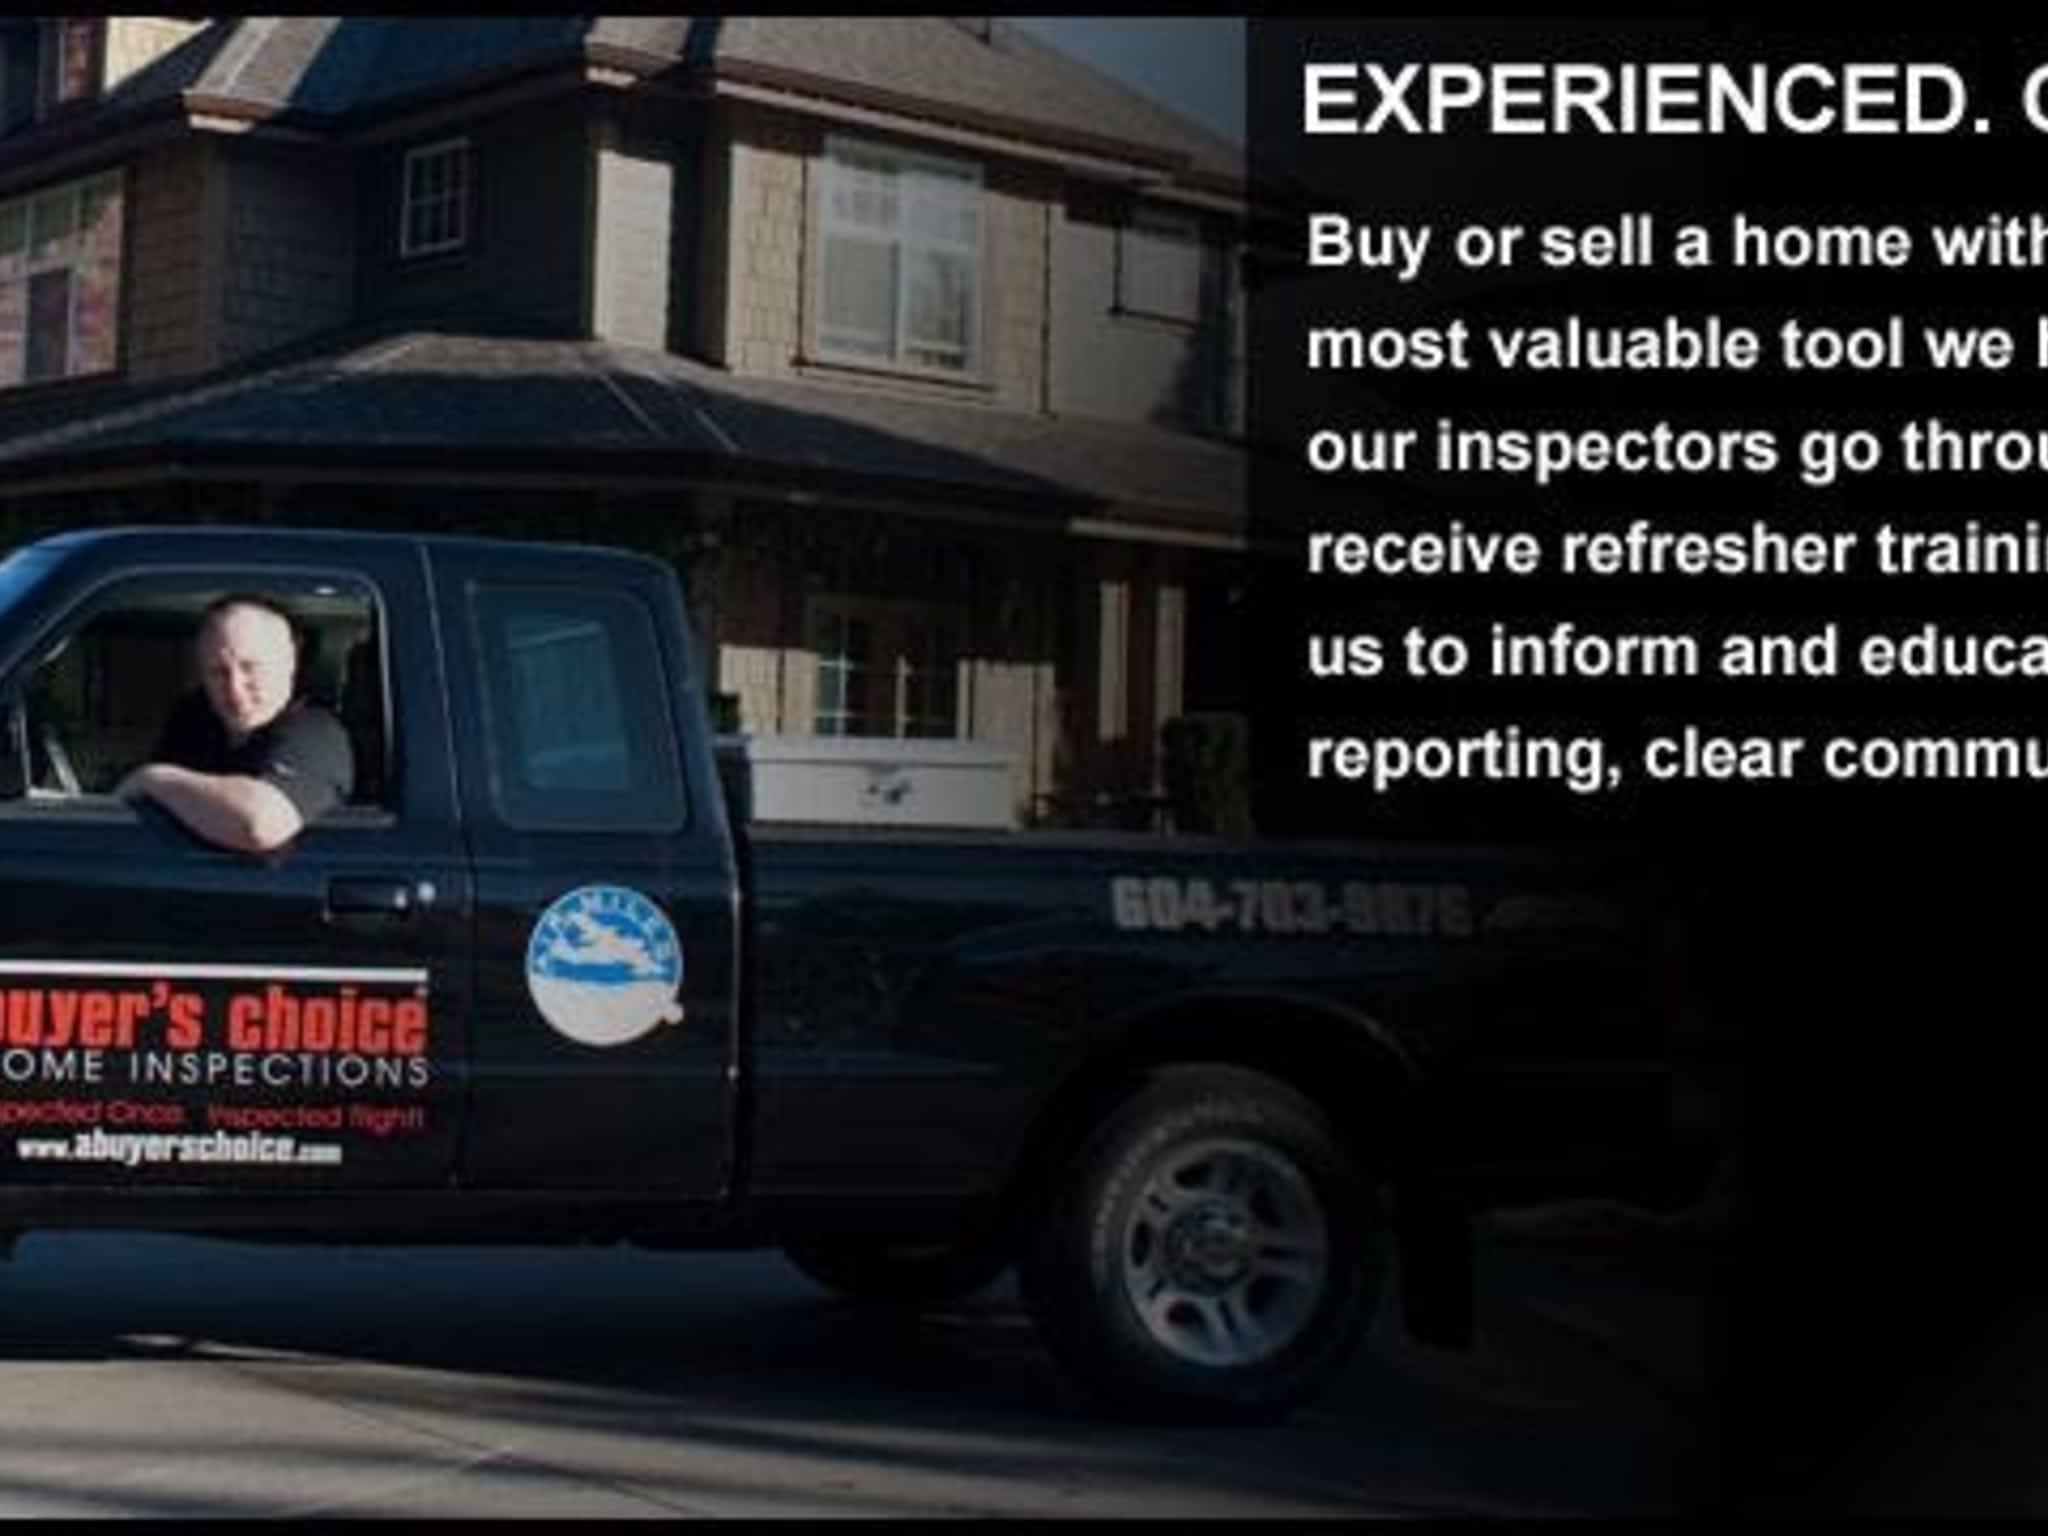 photo A Buyer's Choice Home Inspections